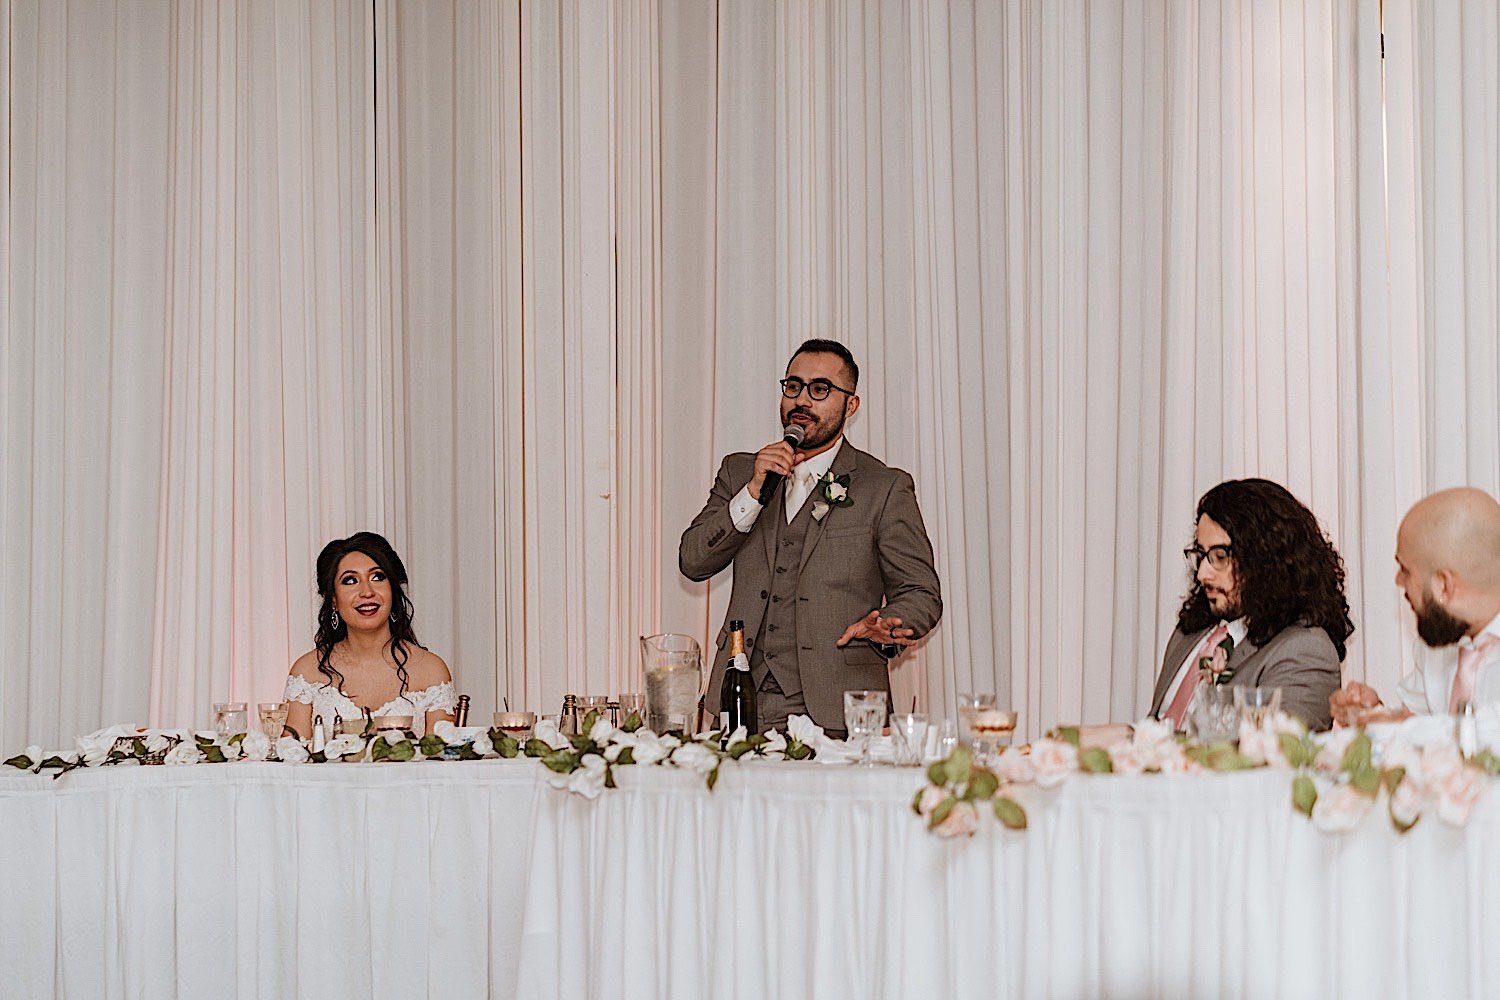 Groom gives a toast during Chicagoland ballroom wedding reception as bride and groomsmen are seated next to him